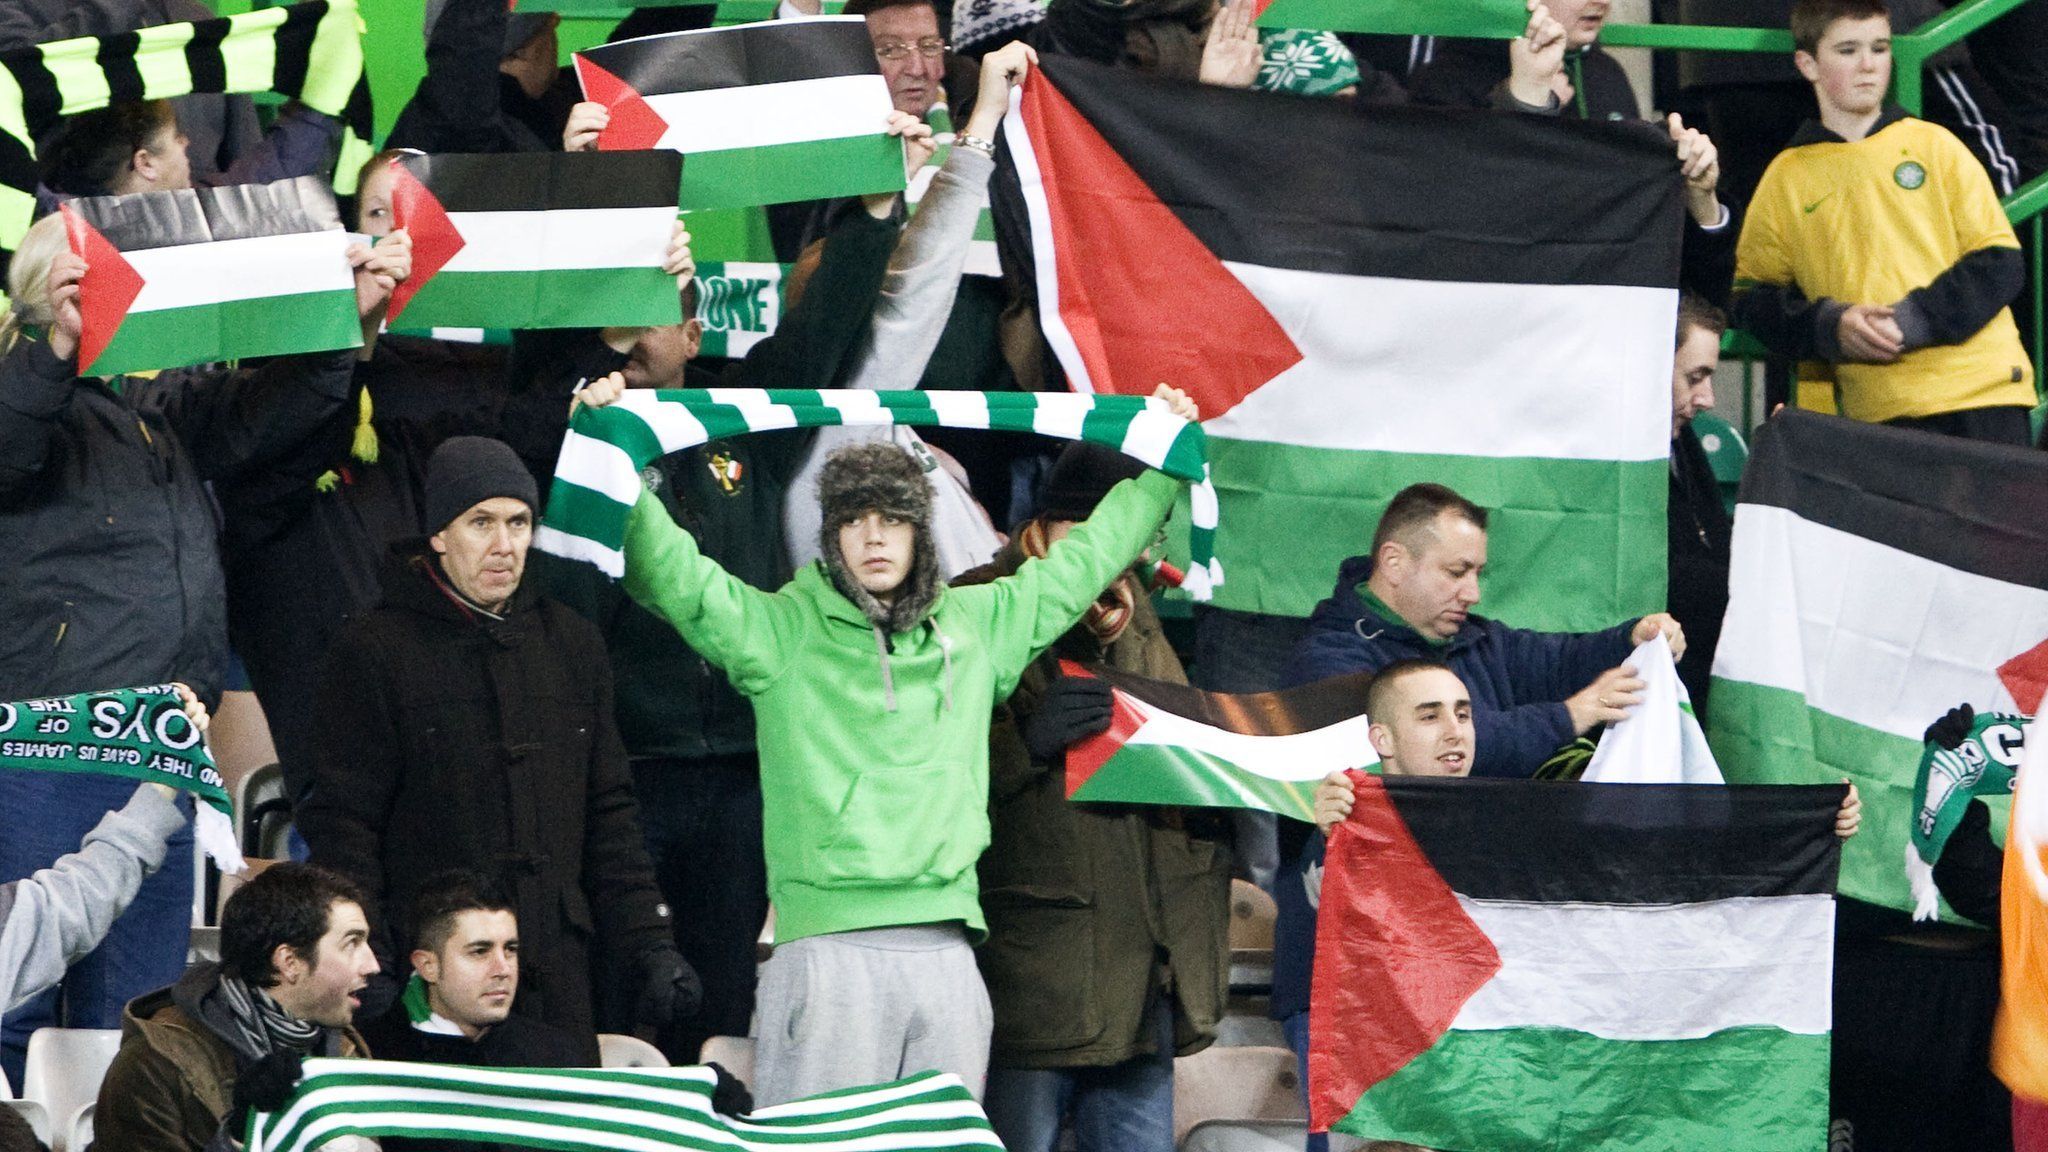 Fans display Palestine flags at Celtic's Champions League play-off first leg against Hapoel Beer Sheva